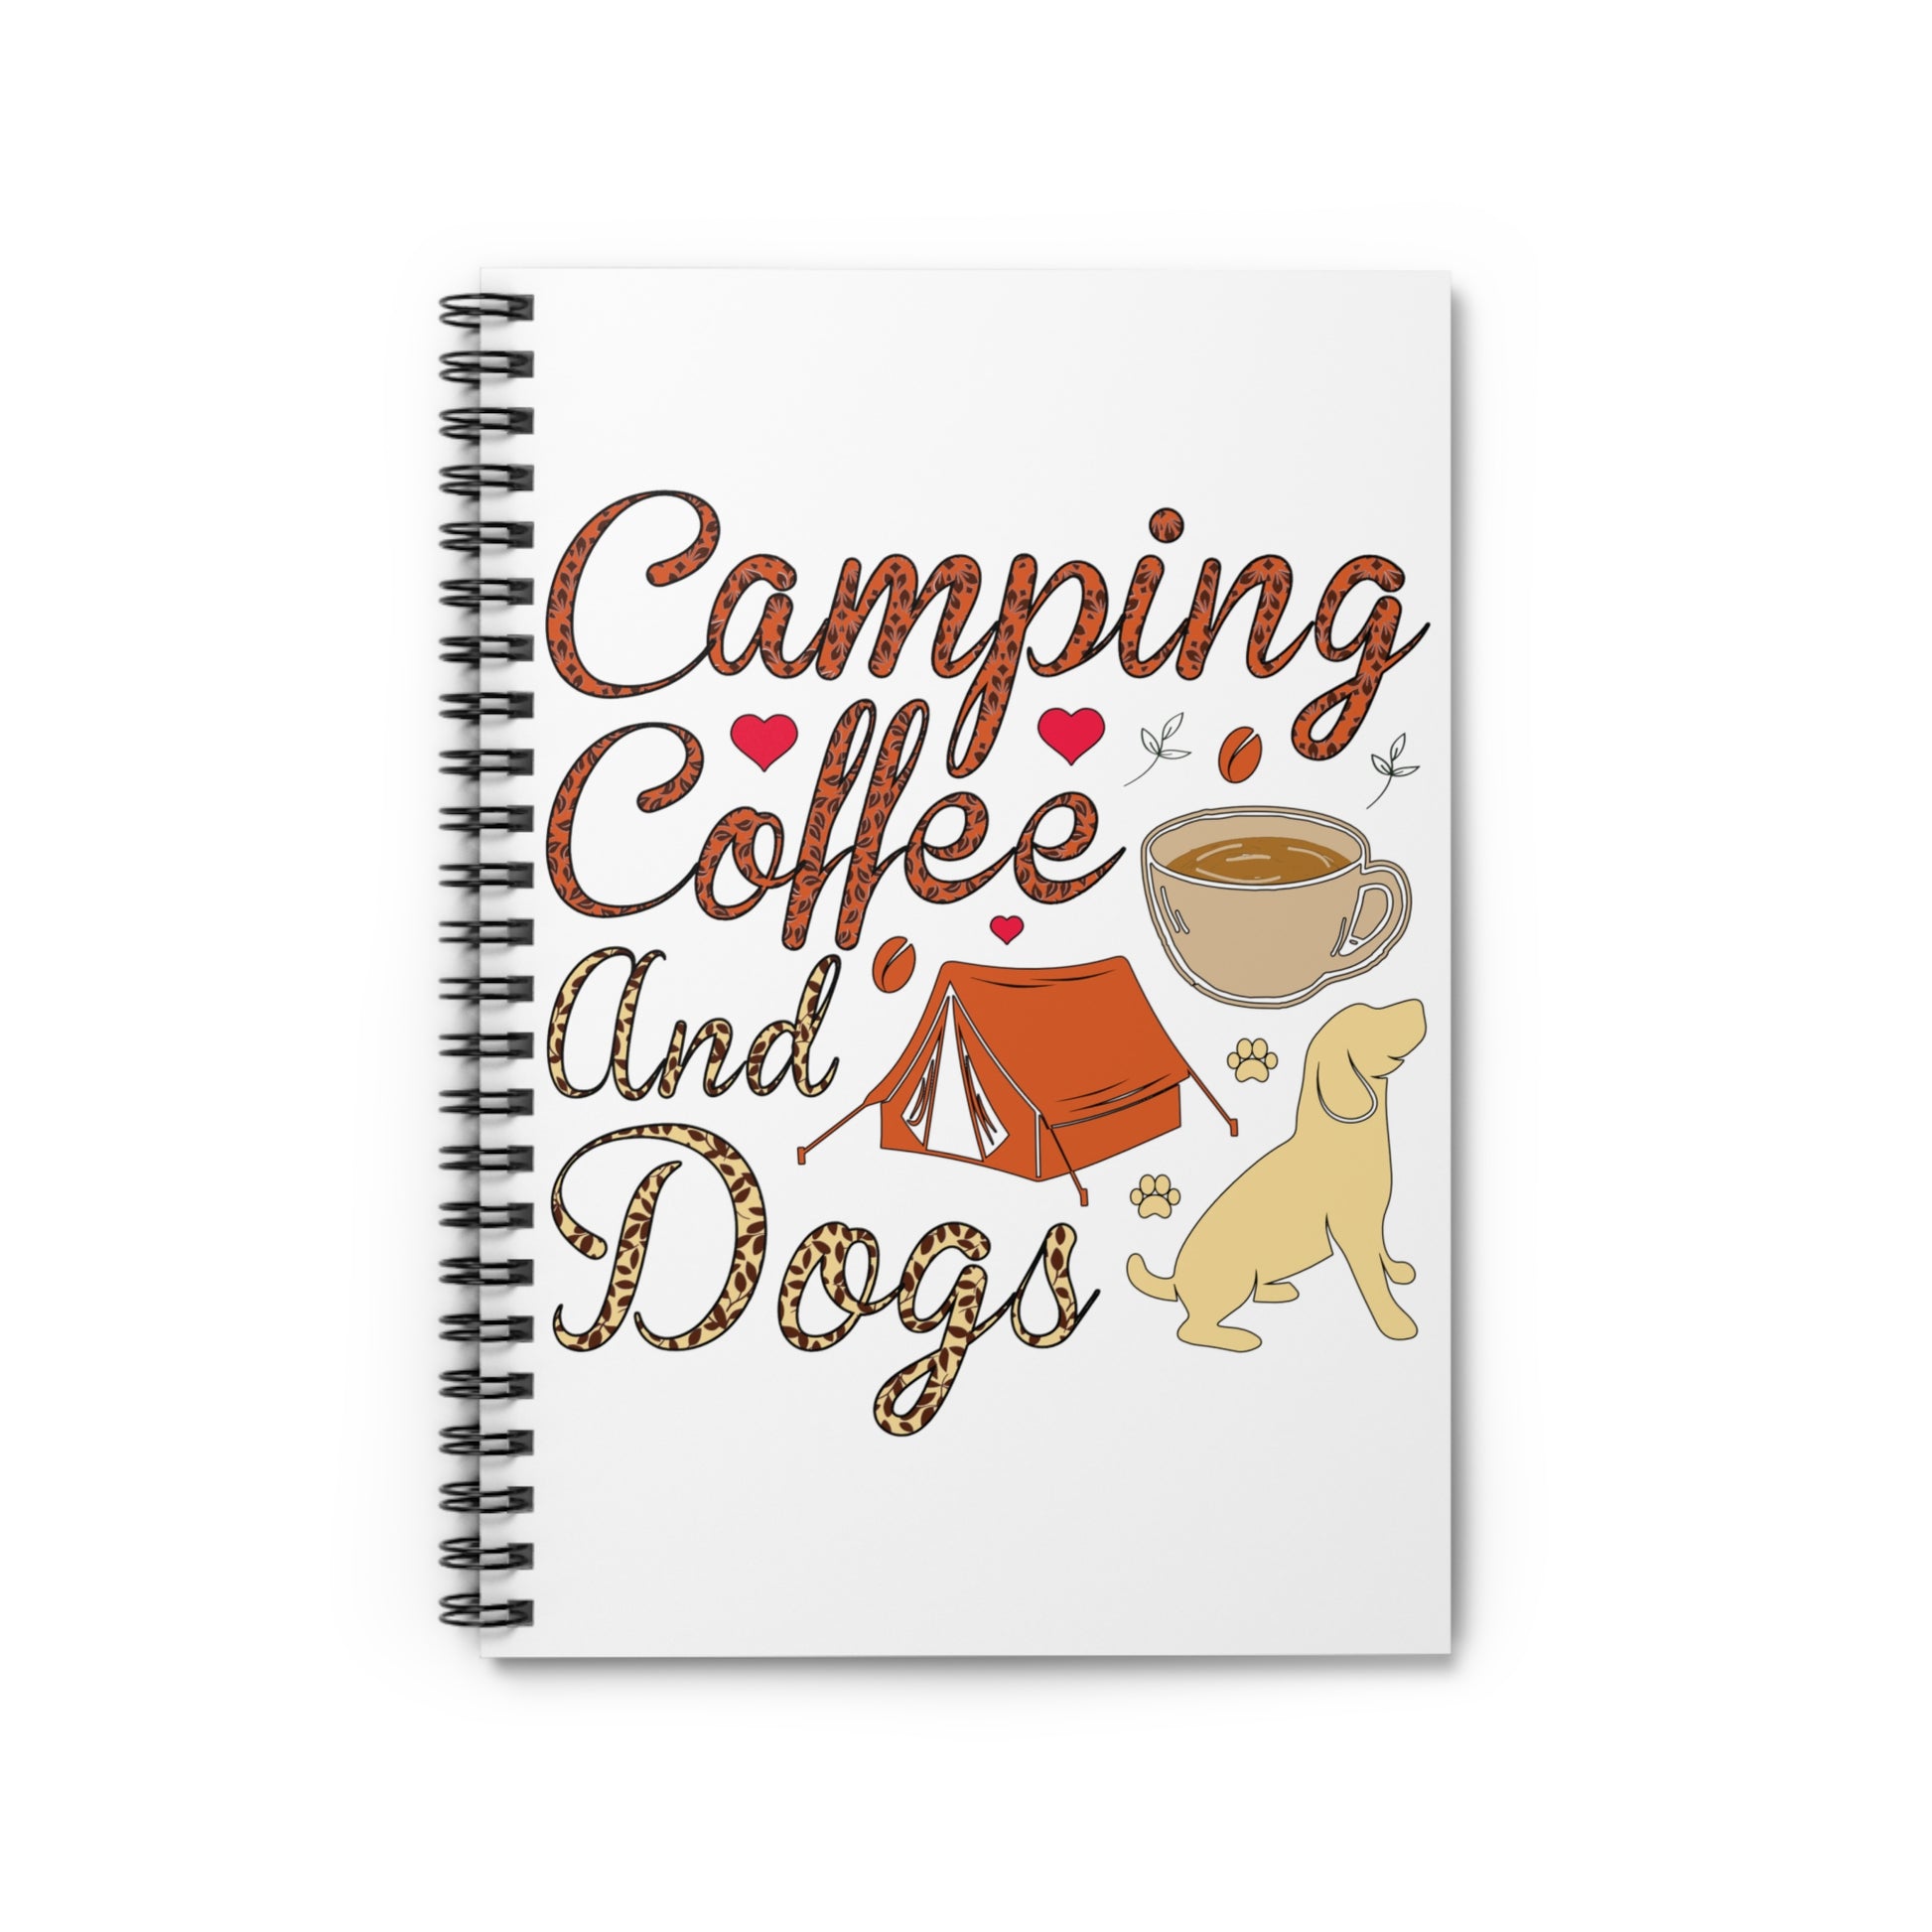 Camping Coffee and Dogs: Spiral Notebook - Log Books - Journals - Diaries - and More Custom Printed by TheGlassyLass